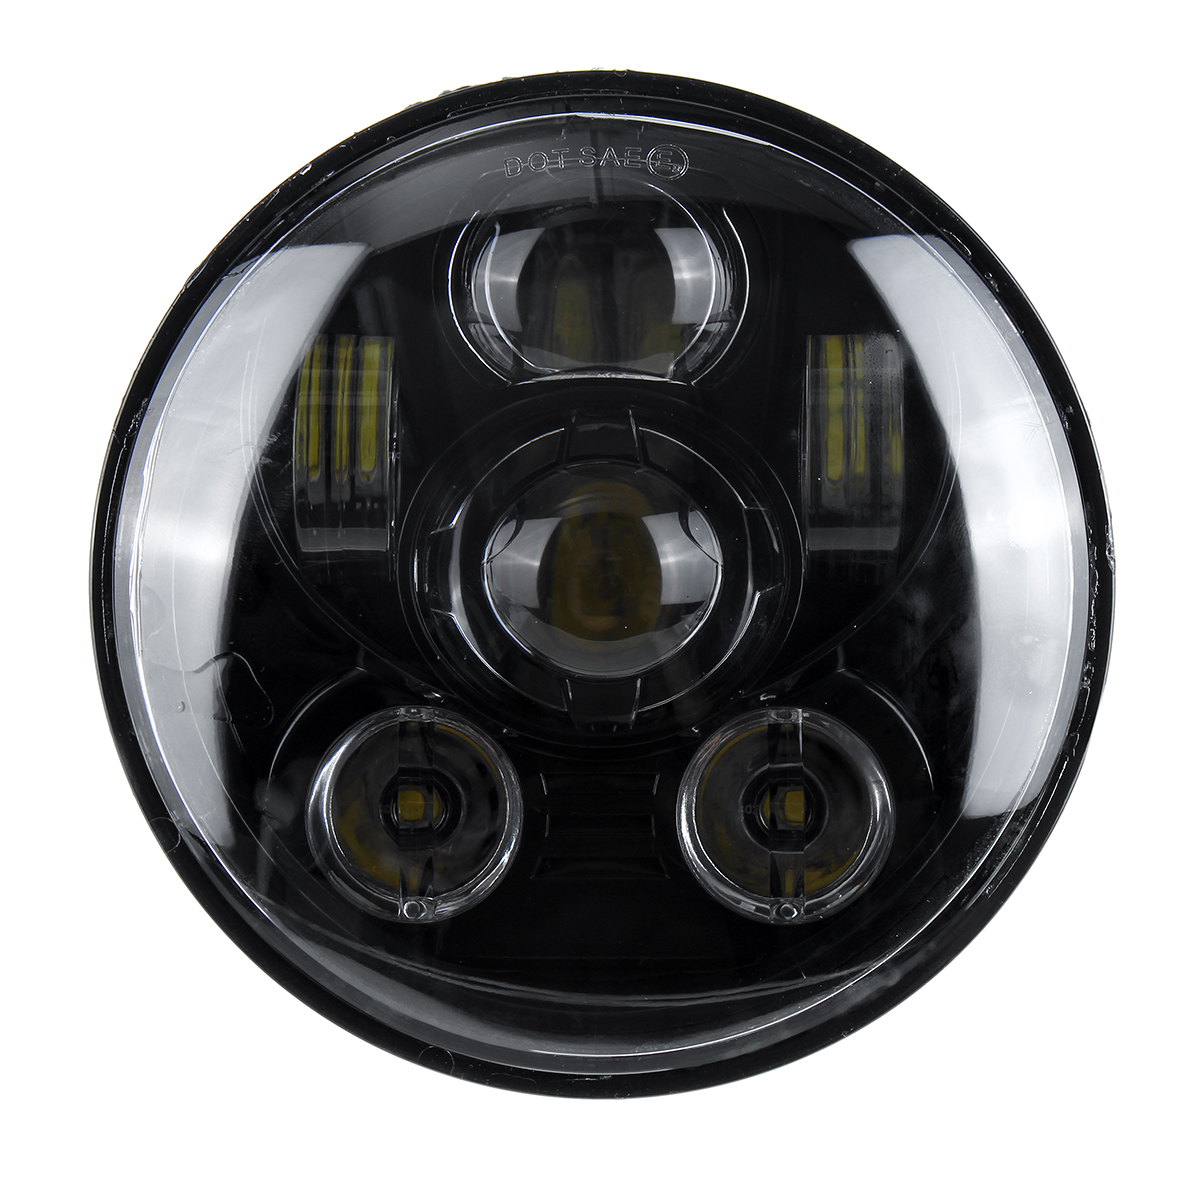 5.75 Inch H4 H13 Motorcycle LED Headlights Sealed Projector Hi-Lo Beam Head Lamp for Harley - Auto GoShop